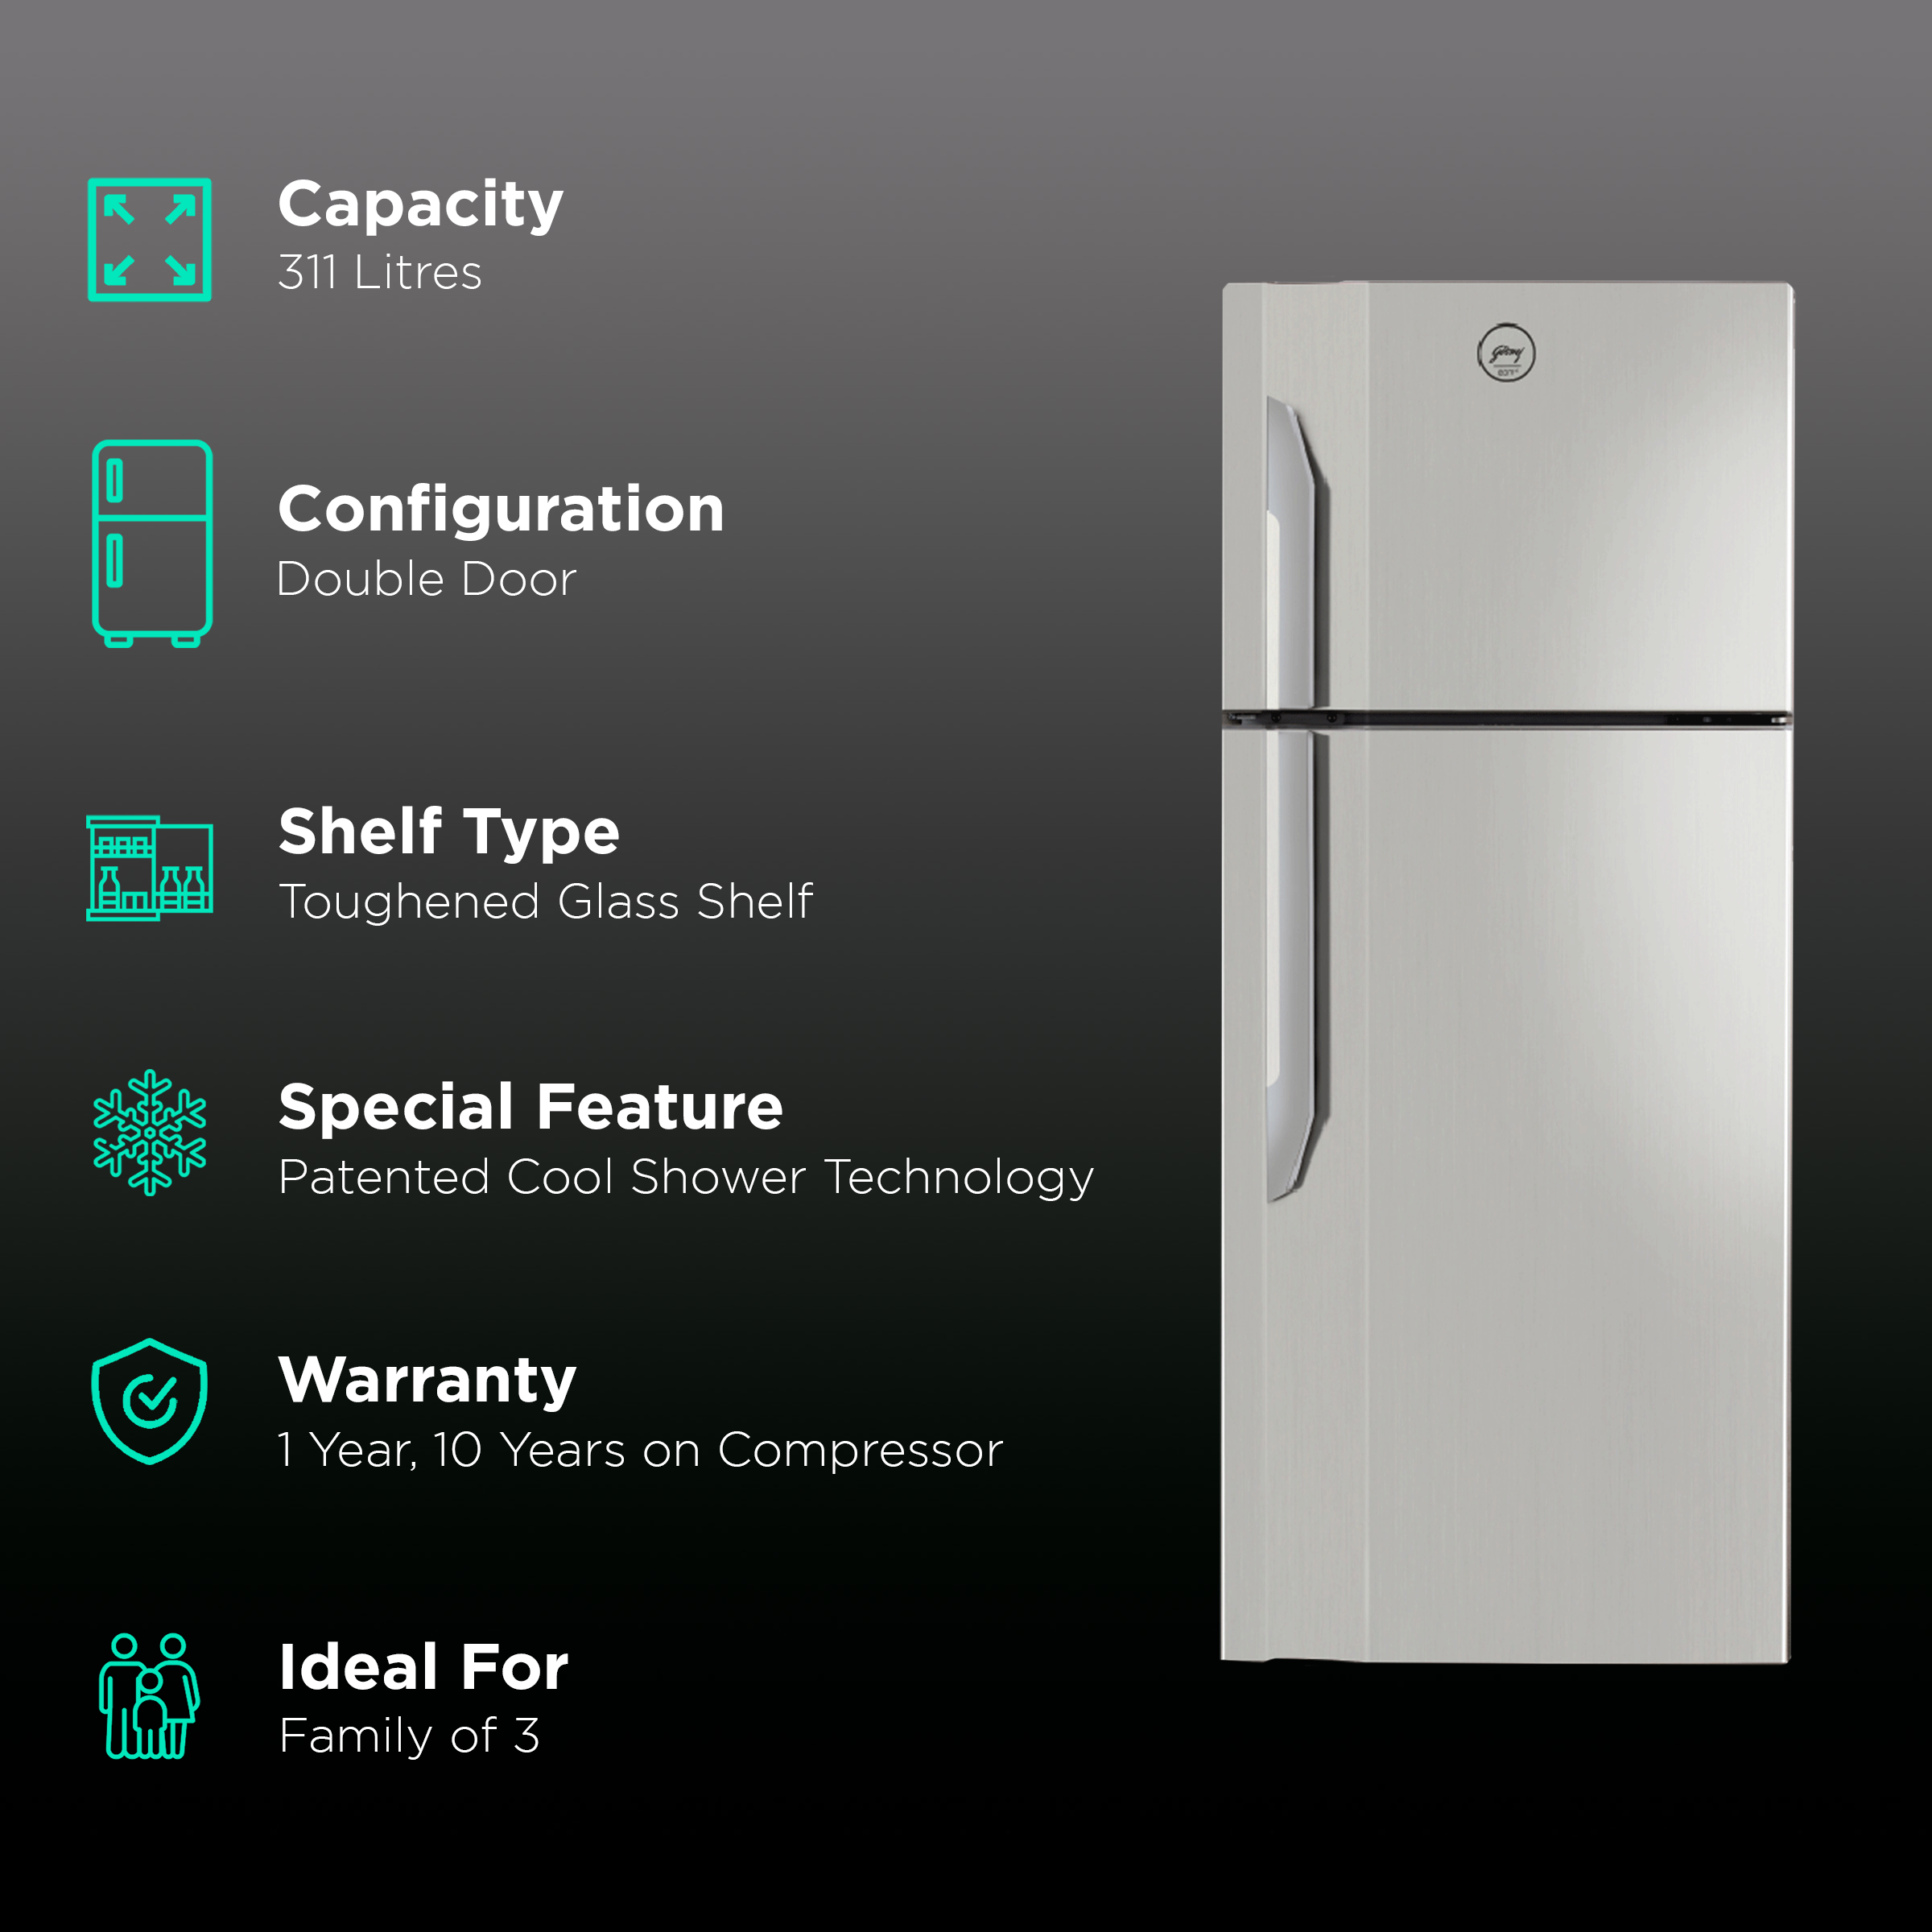 Godrej Eon Vibe 311 Litres 2 Star Frost Free Double Door Refrigerator with Cool Shower Technology (RT EON VIBE 326B 25 HCF, Steel Rush)_2